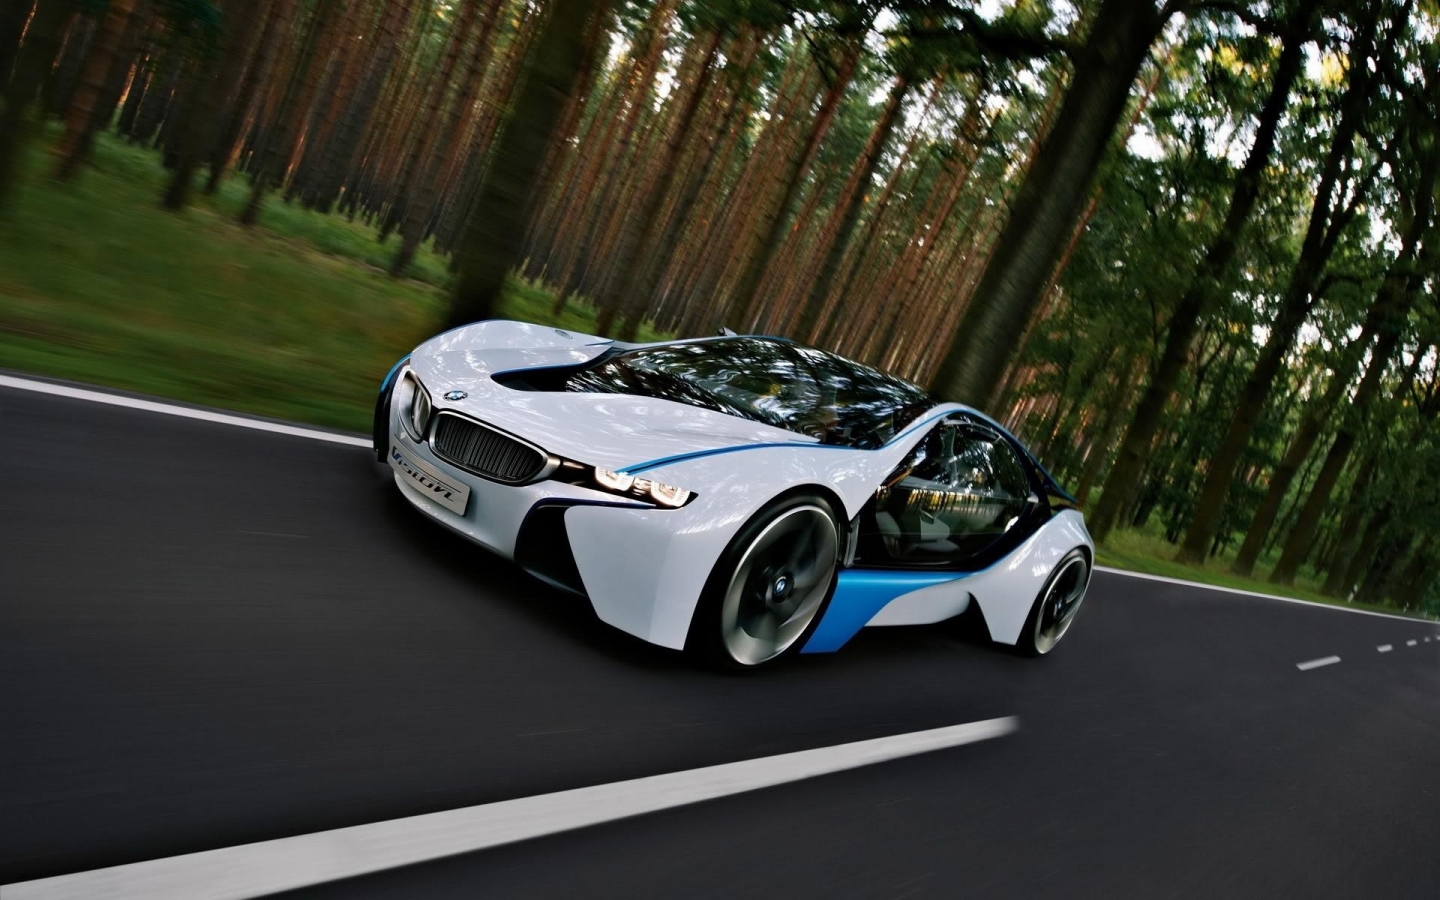 Superb BMW Vision Concept for 1440 x 900 widescreen resolution